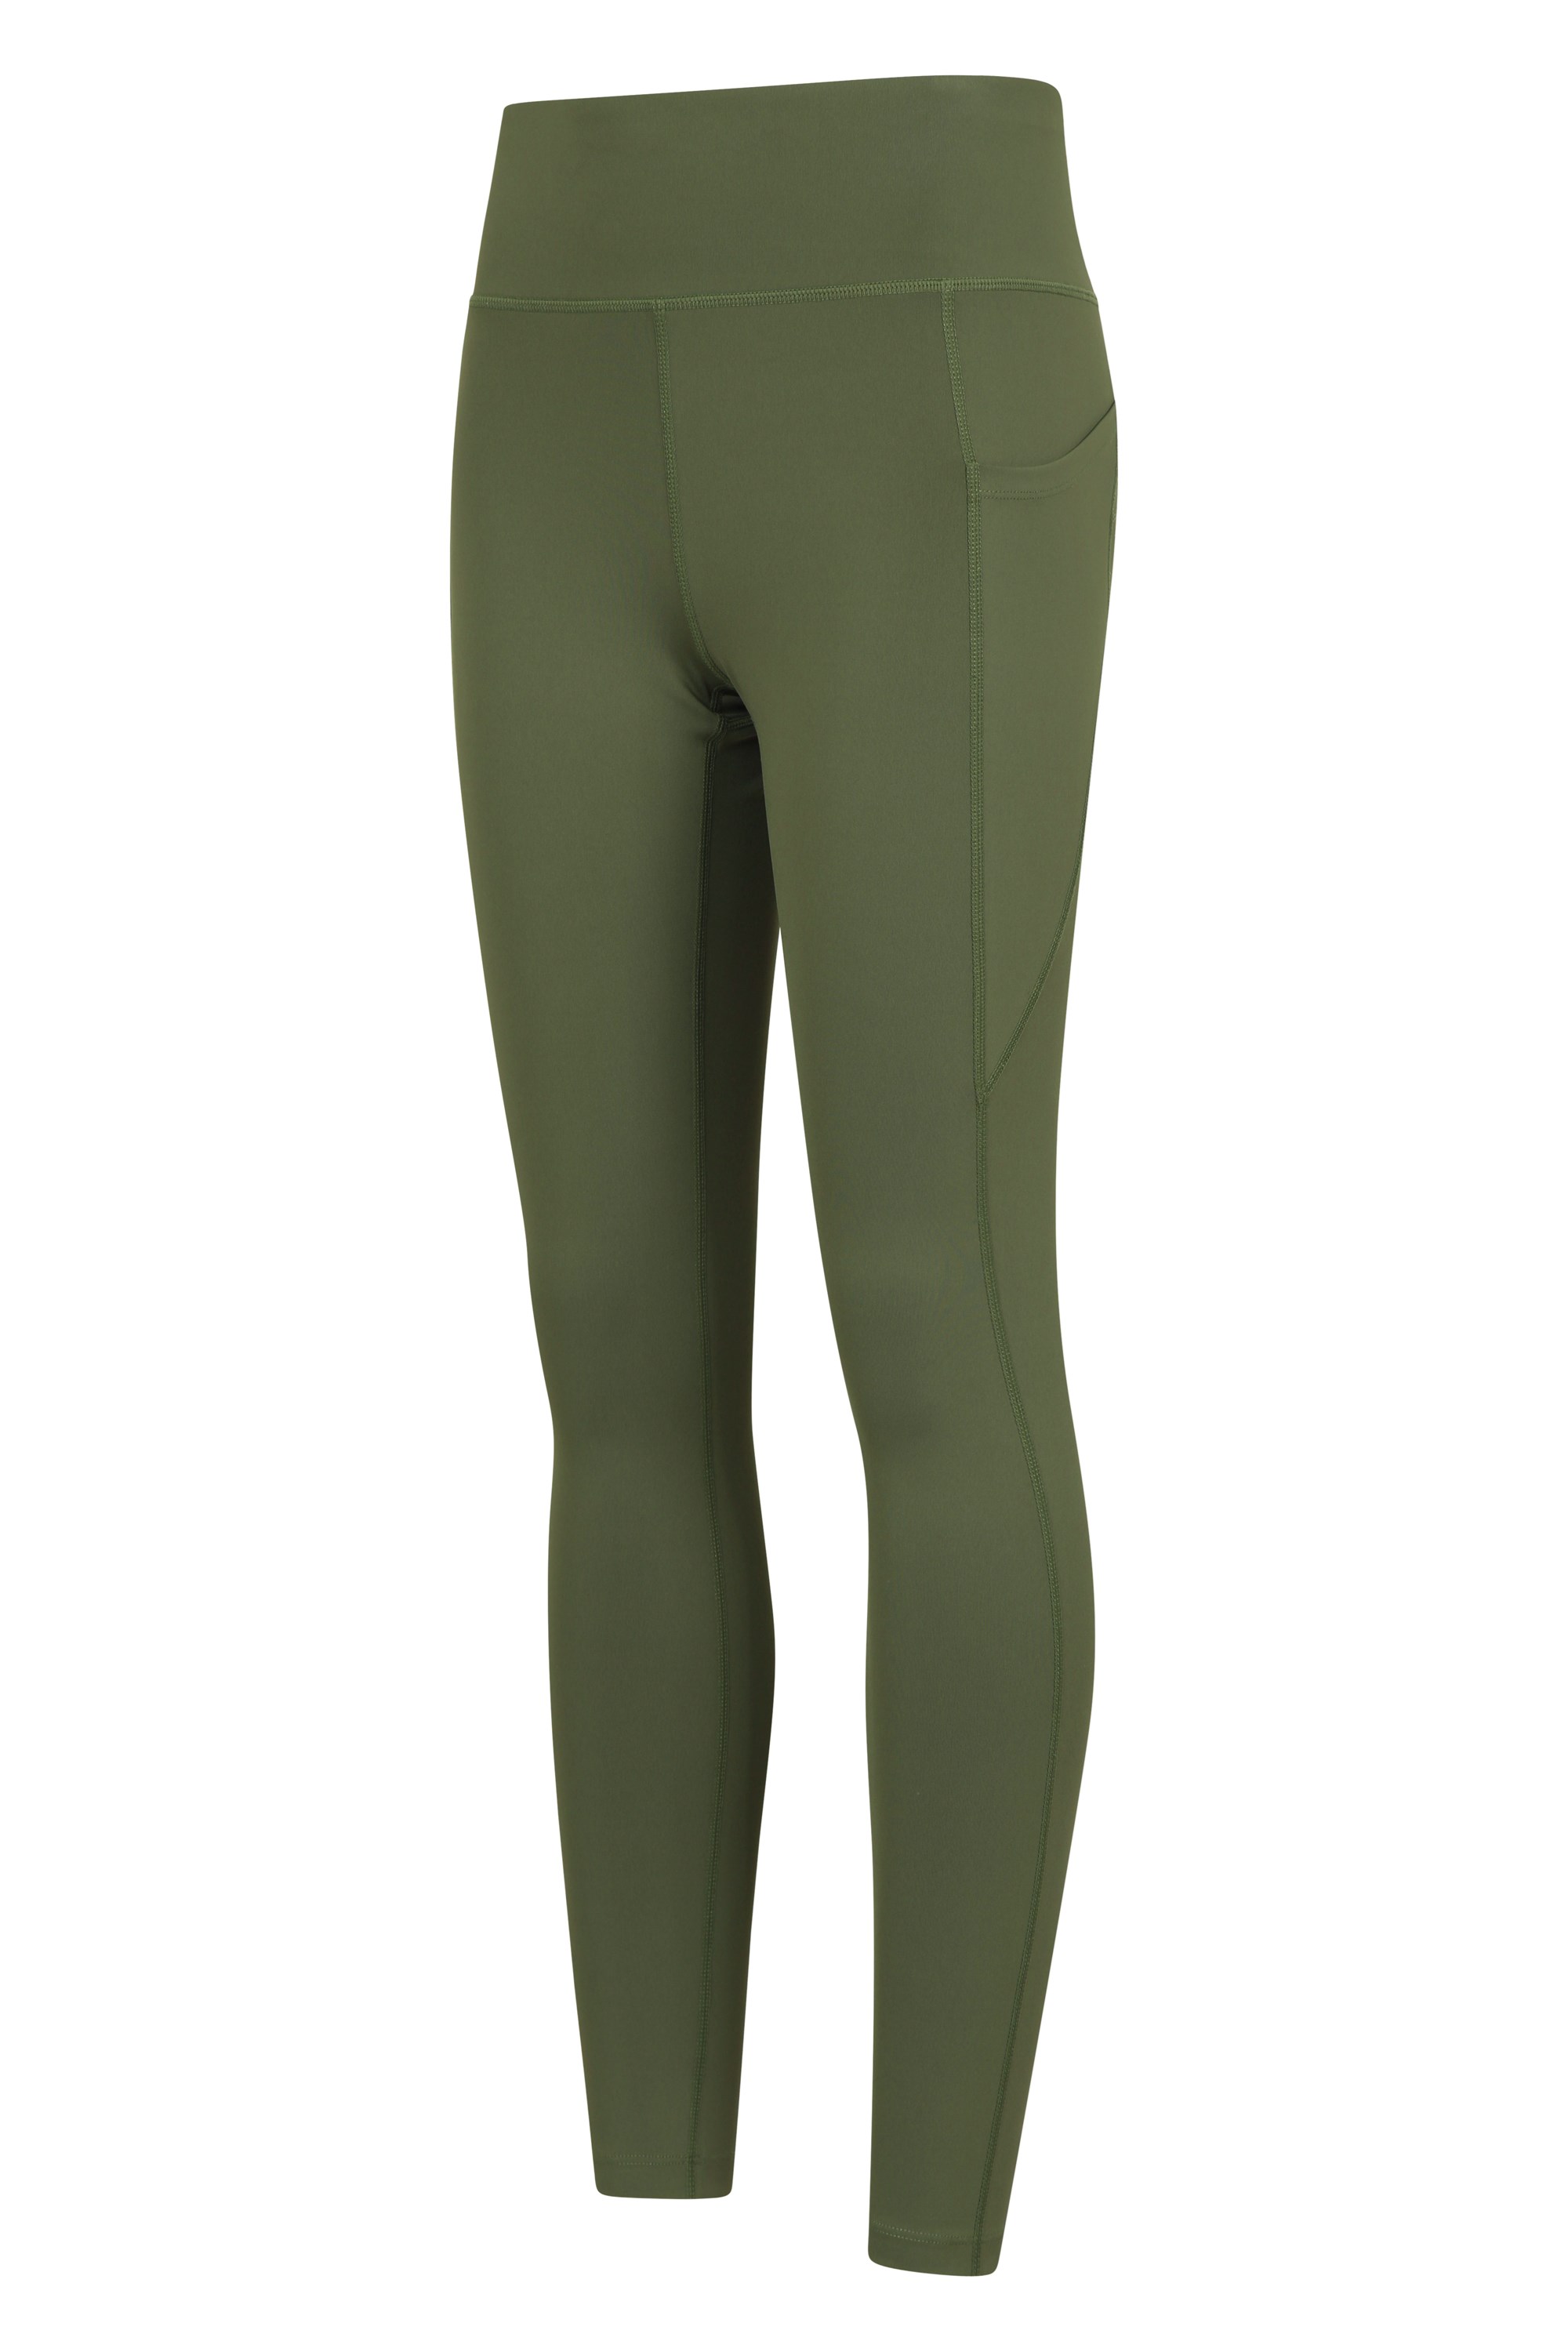 Thermal Leggings : Mountain Warehouse Canada Footwear, Have a look